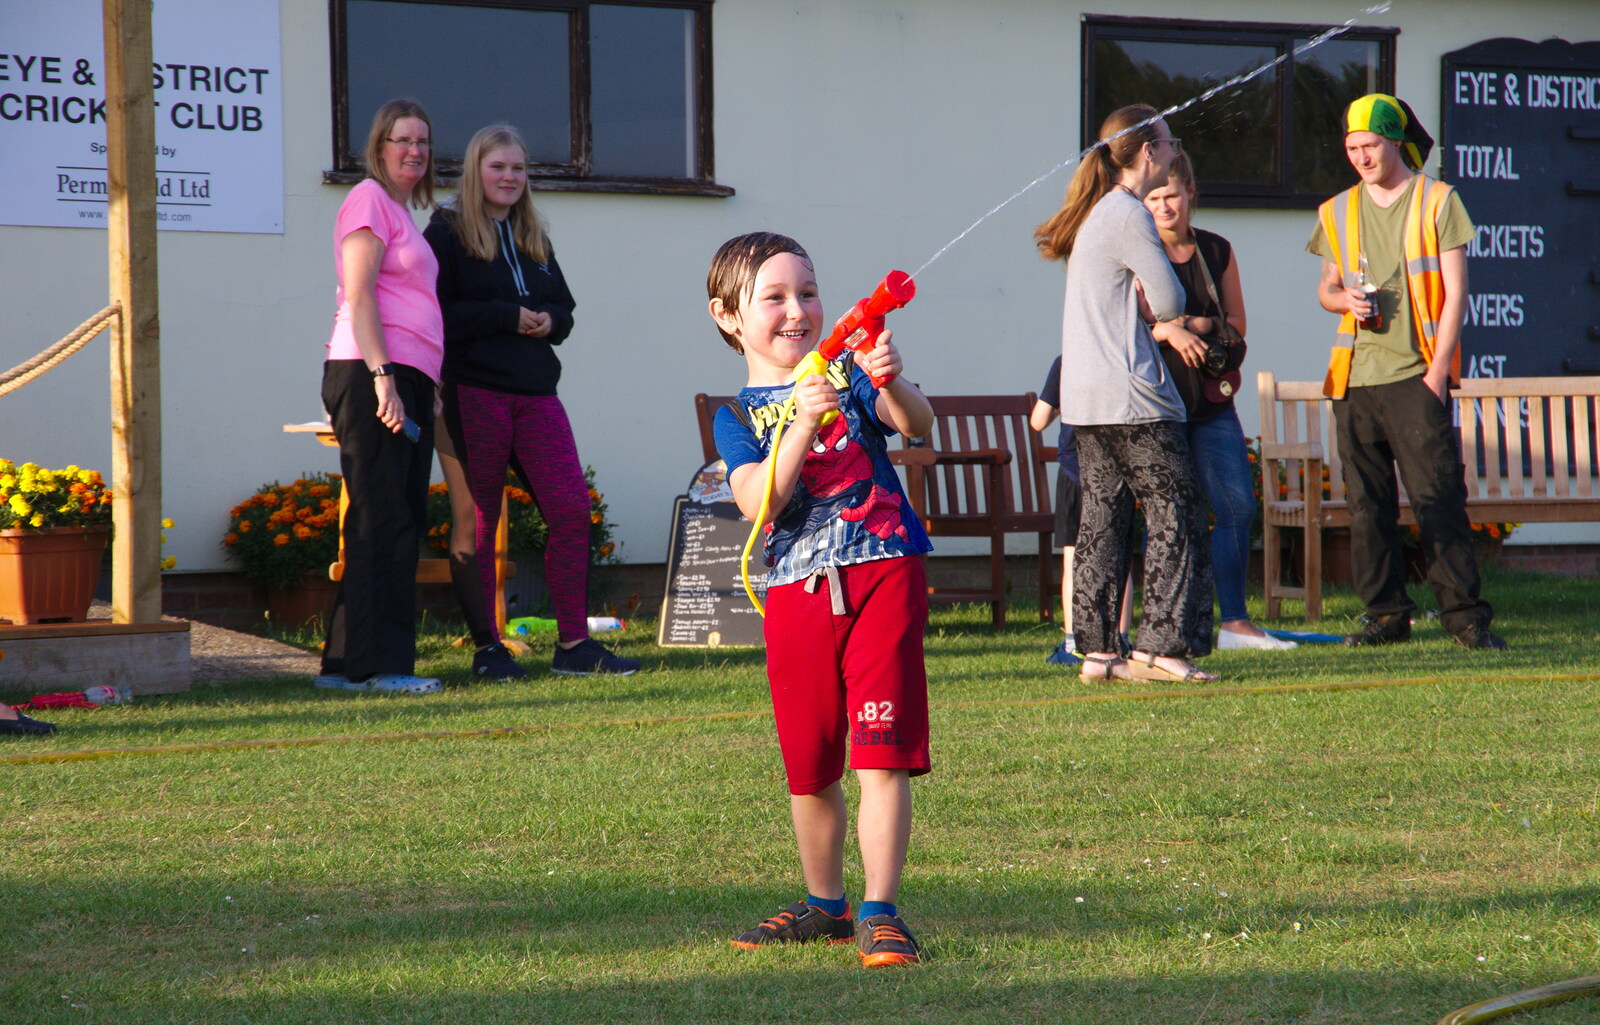 A boy gamely takes on the hose from A Water Fight with a Fire Engine, Eye Cricket Club, Suffolk - 5th August 2019